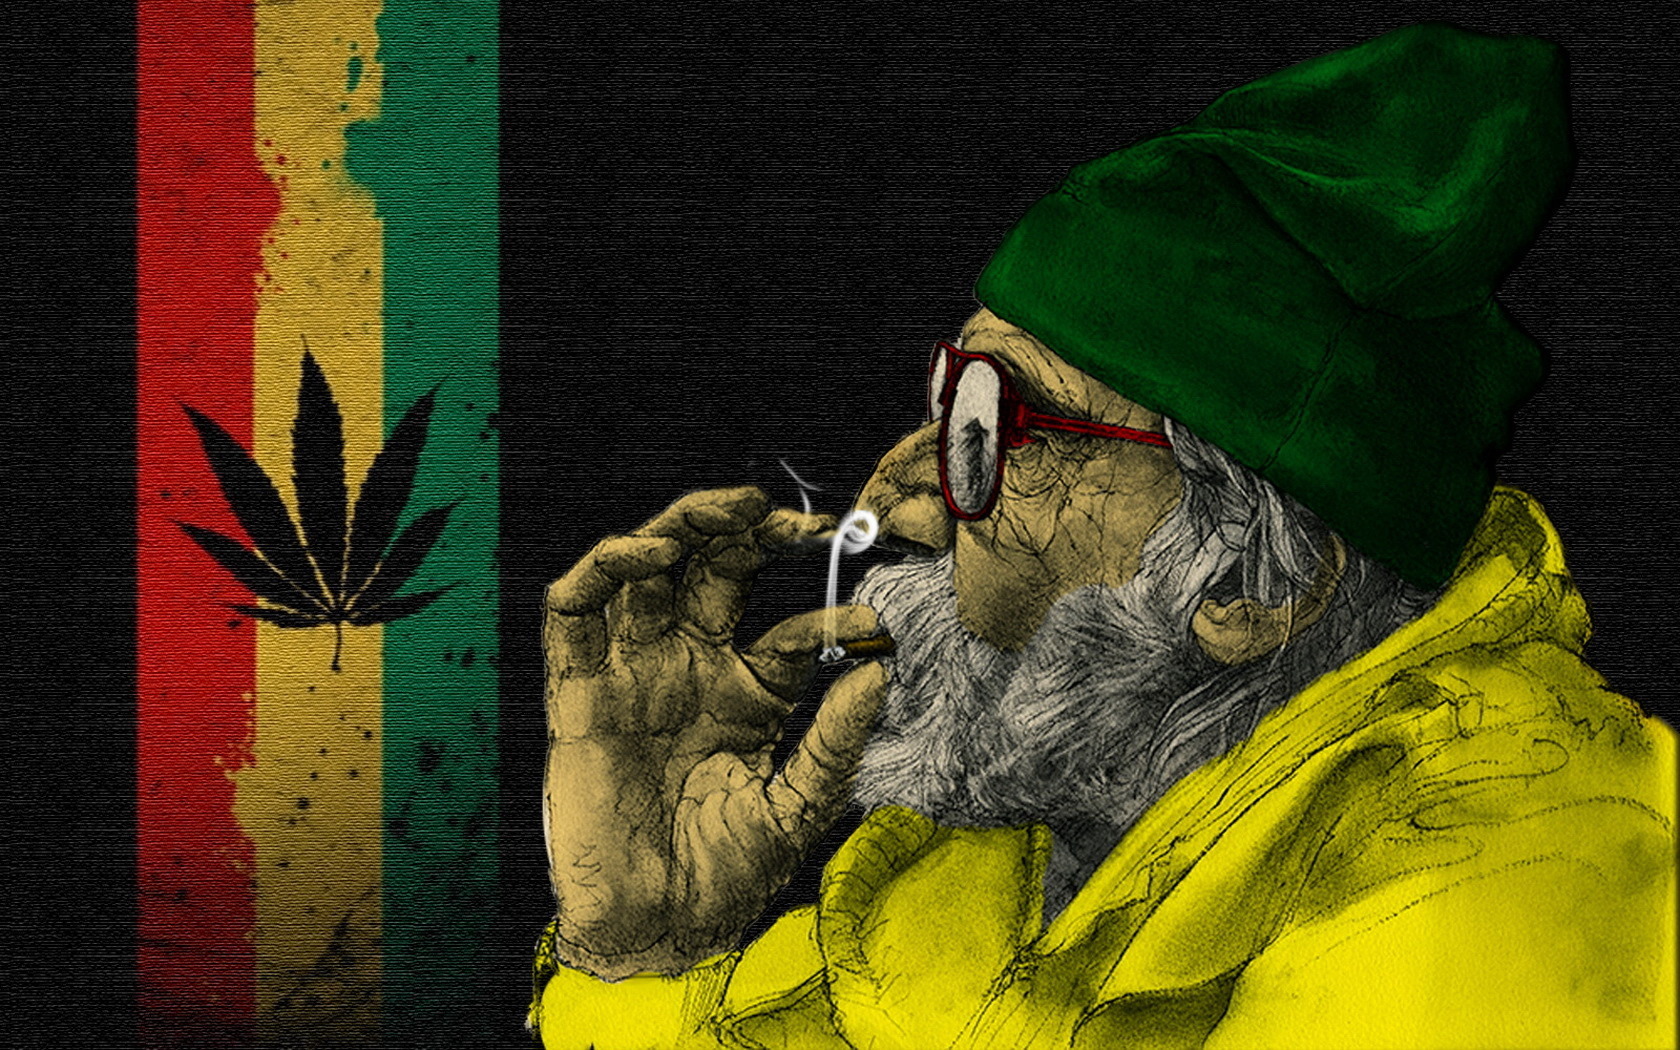 Previous, Funny wallpapers - The Old Man and marijuana wallpaper